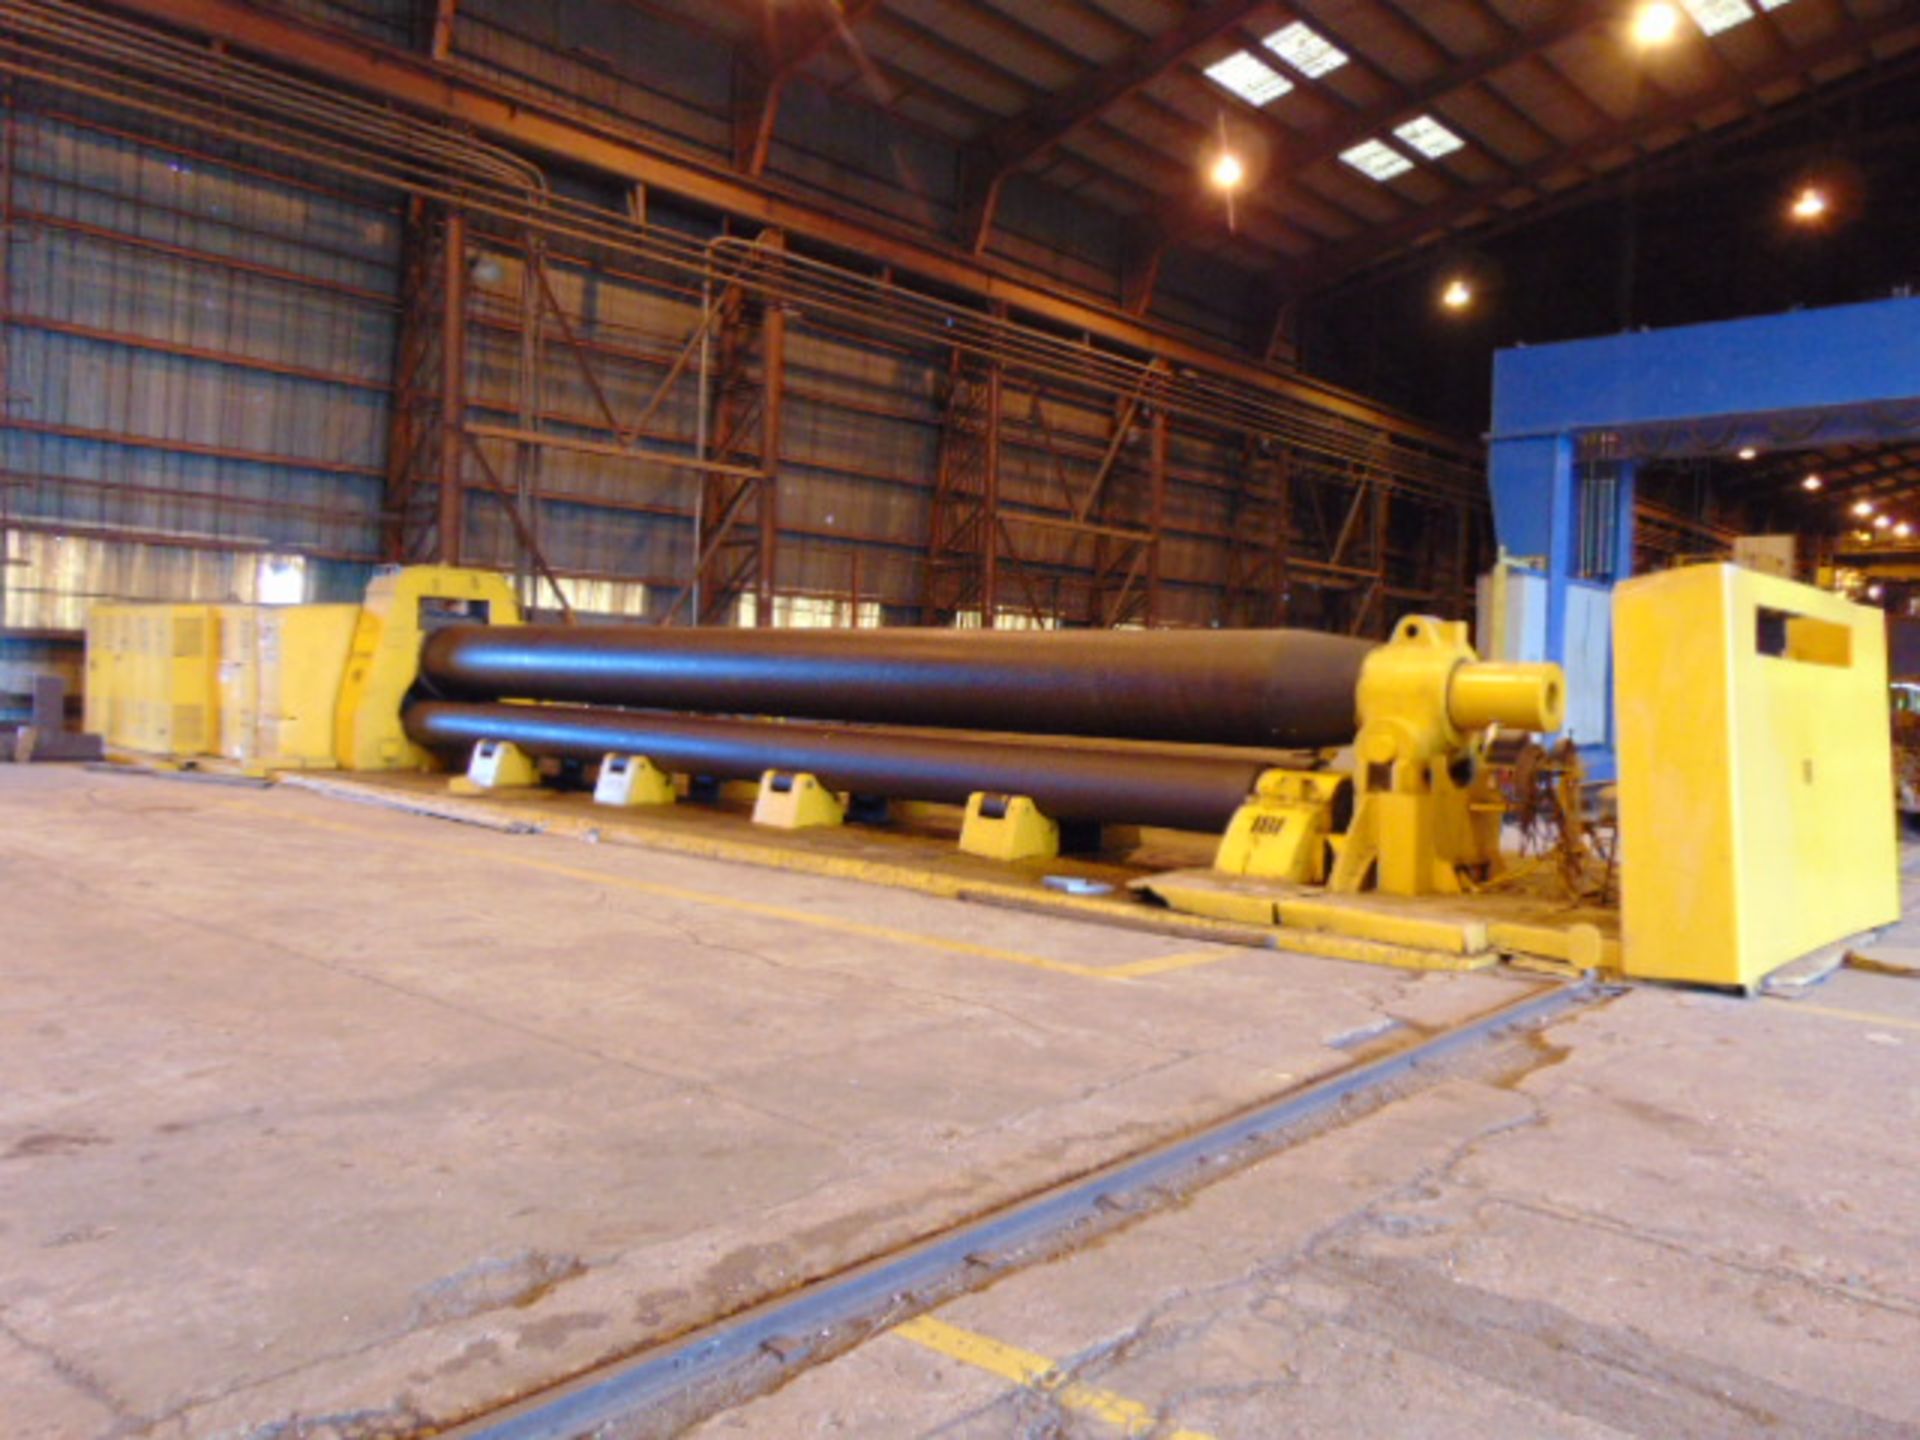 PLATE BENDING ROLL, BALDWIN SOUTHWARK PYRAMID TYPE, 42' overall length, approx. 36" dia. top roll,